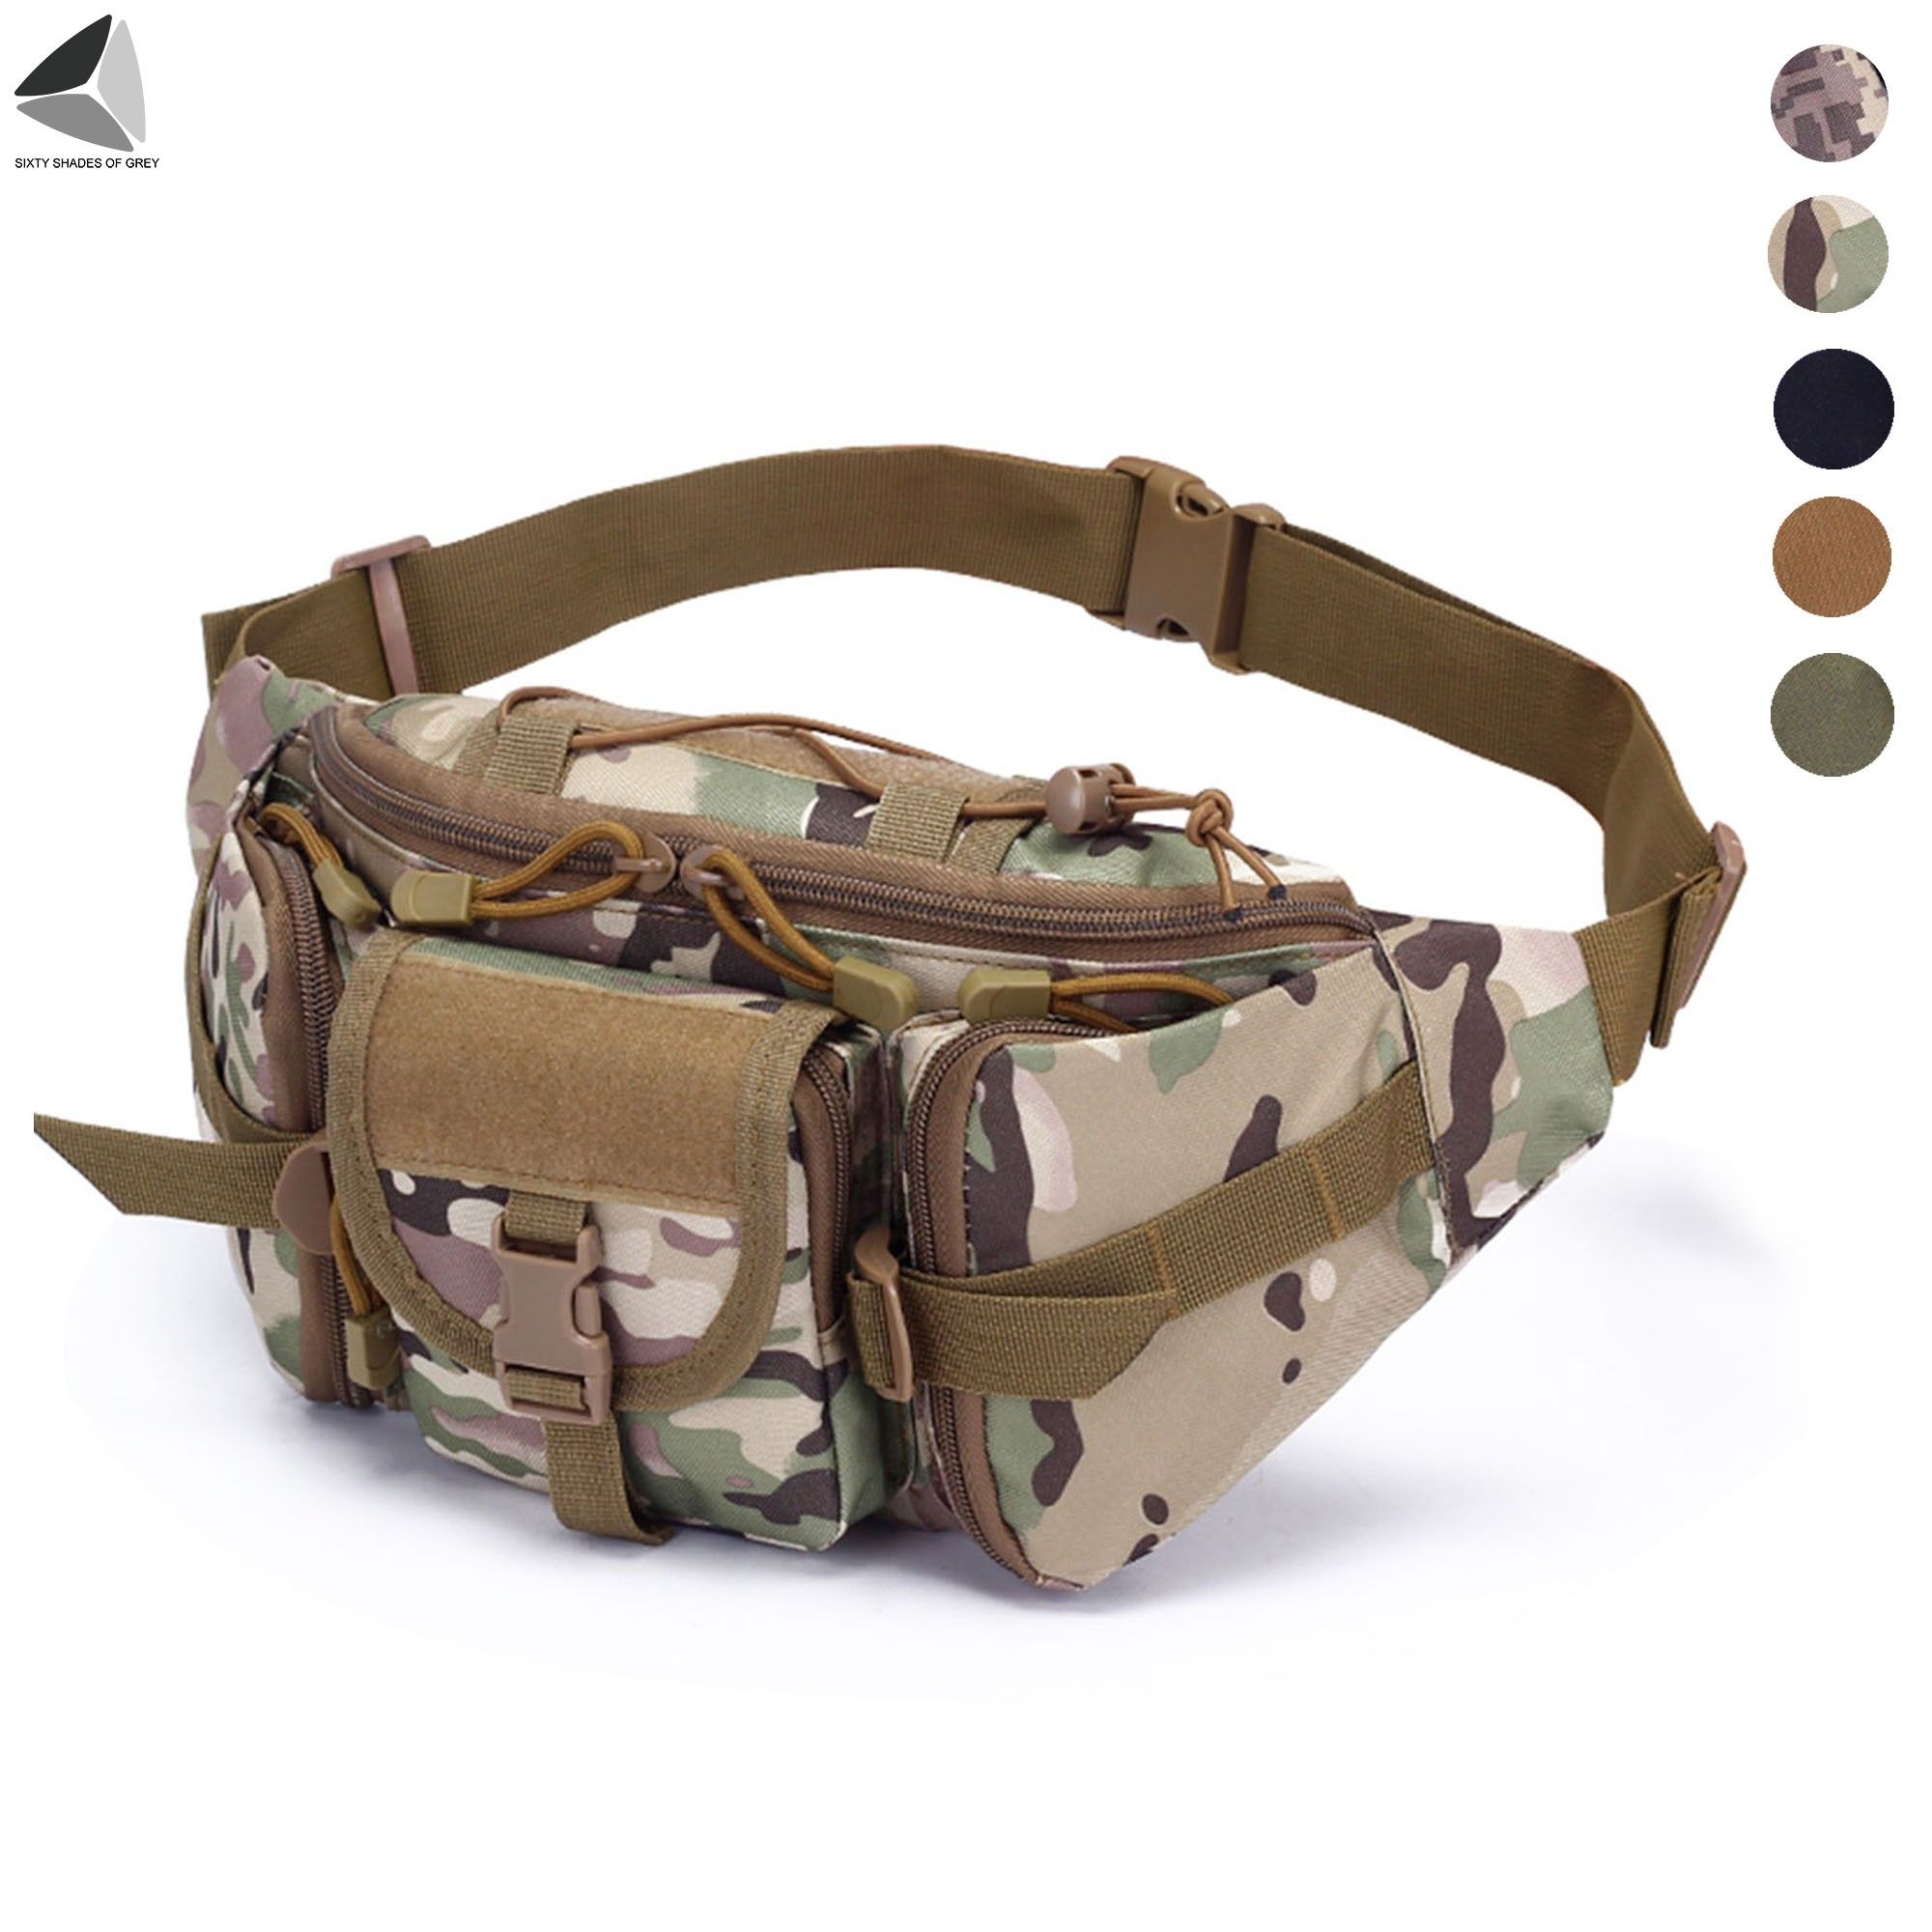 PULLIMORE Fanny Pack Waist Bag Pack Utility Hip Pack Bag with Adjustable Strap Waterproof for Outdoors Fishing Cycling Camping Hiking Traveling Hunting (Camouflage) - image 1 of 9